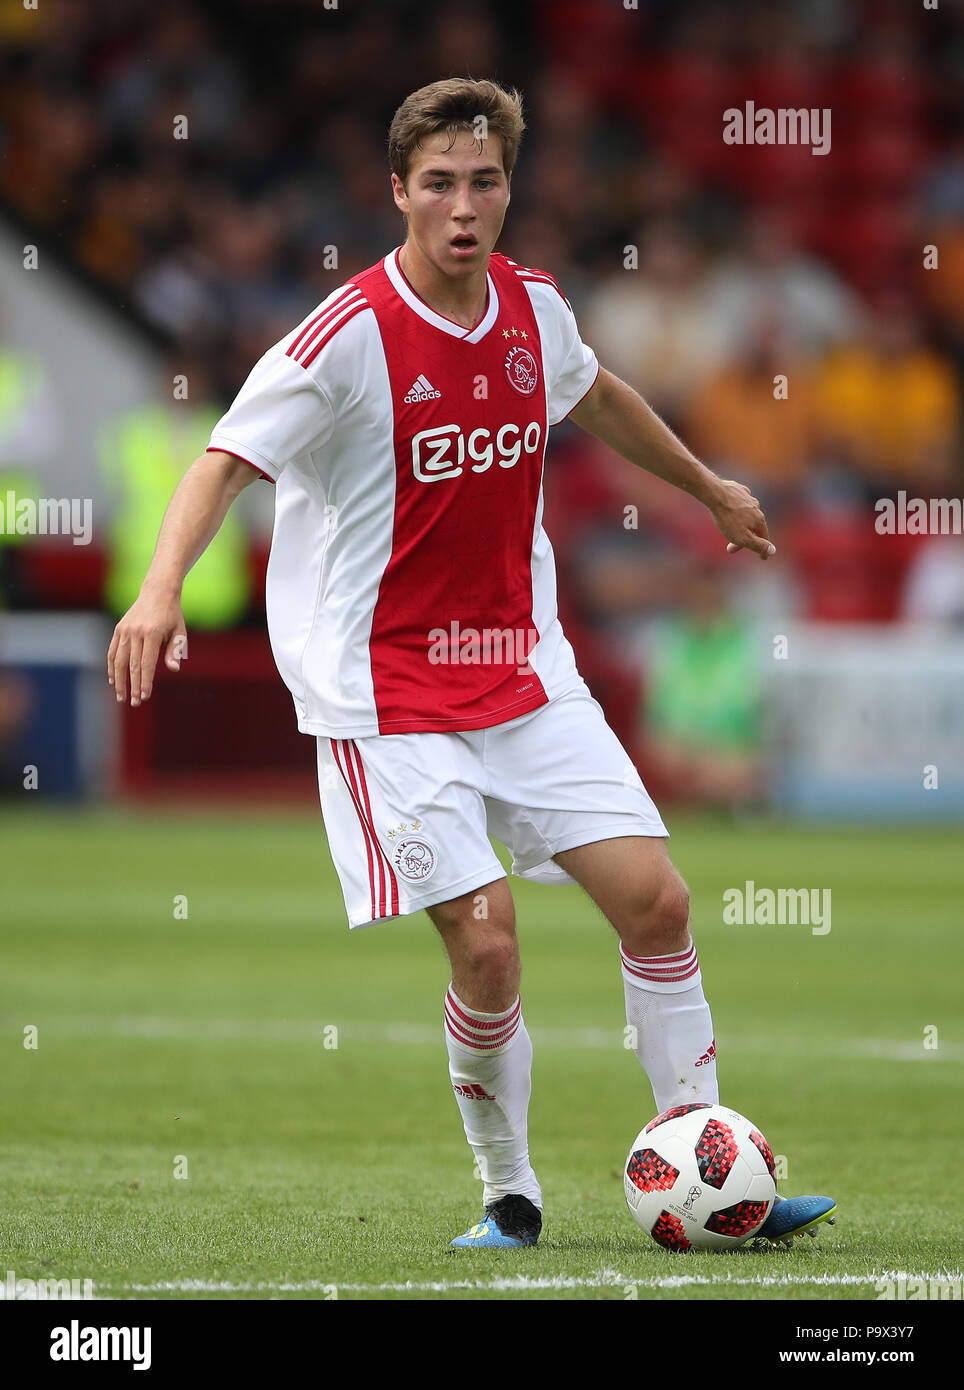 Ajax's Carel Eiting during a pre season friendly match at the Banks's Stadium, Walsall. PRESS ASSOCIATION Photo. Picture date: Thursday July 19, 2018. Photo credit should read: Nick Potts/PA Wire. EDITORIAL USE ONLY No use with unauthorised audio, video, data, fixture lists, club/league logos or 'live' services. Online in-match use limited to 75 images, no video emulation. No use in betting, games or single club/league/player publications. Stock Photo